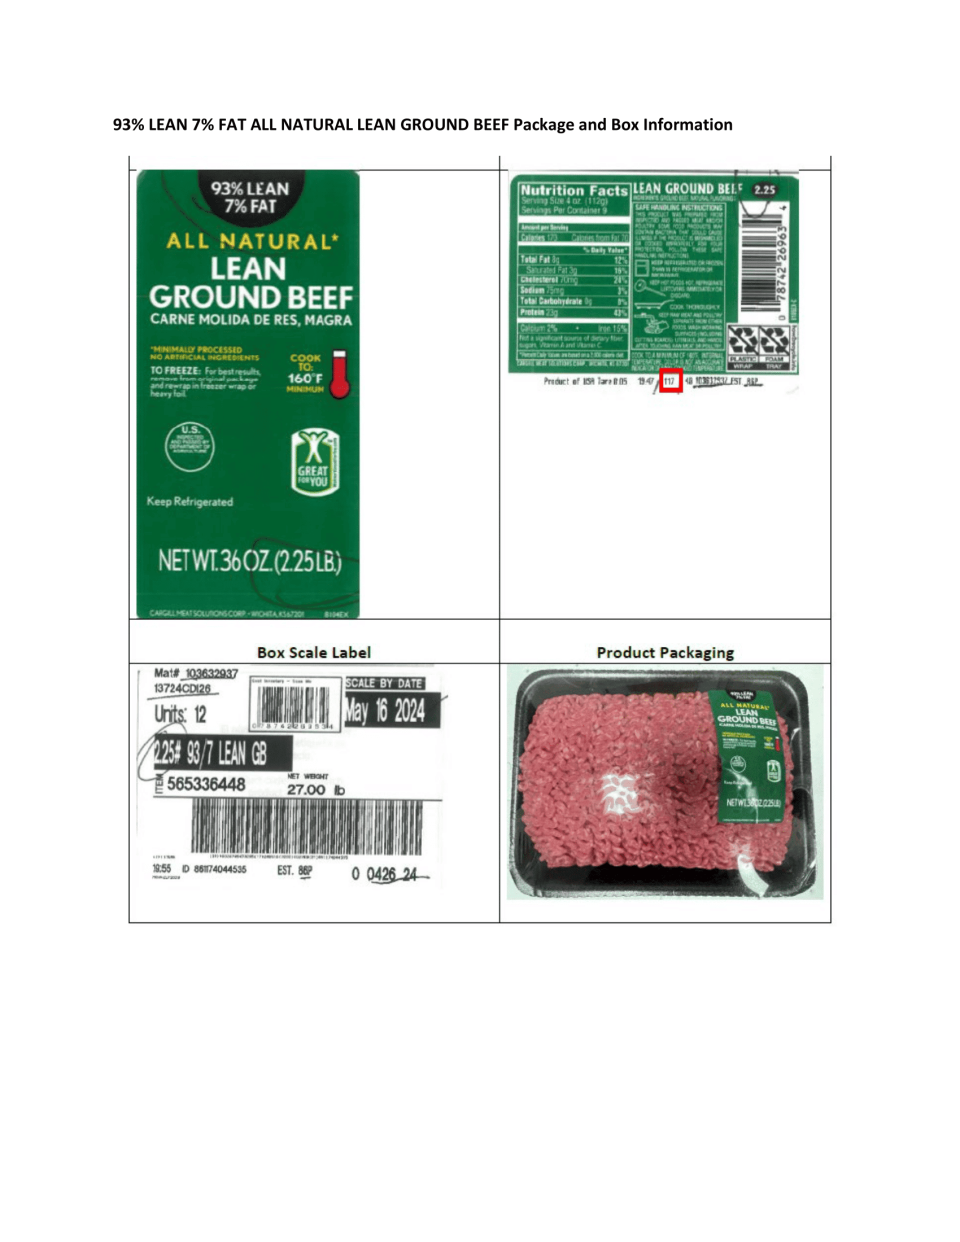 Here is one of the labels for packaged ground beef from Cargill Solutions, a Pennsylvania-based meat and poultry provider, that is under recall because it may be infected with E. coli bacteria and sold to Walmart locations across the country.